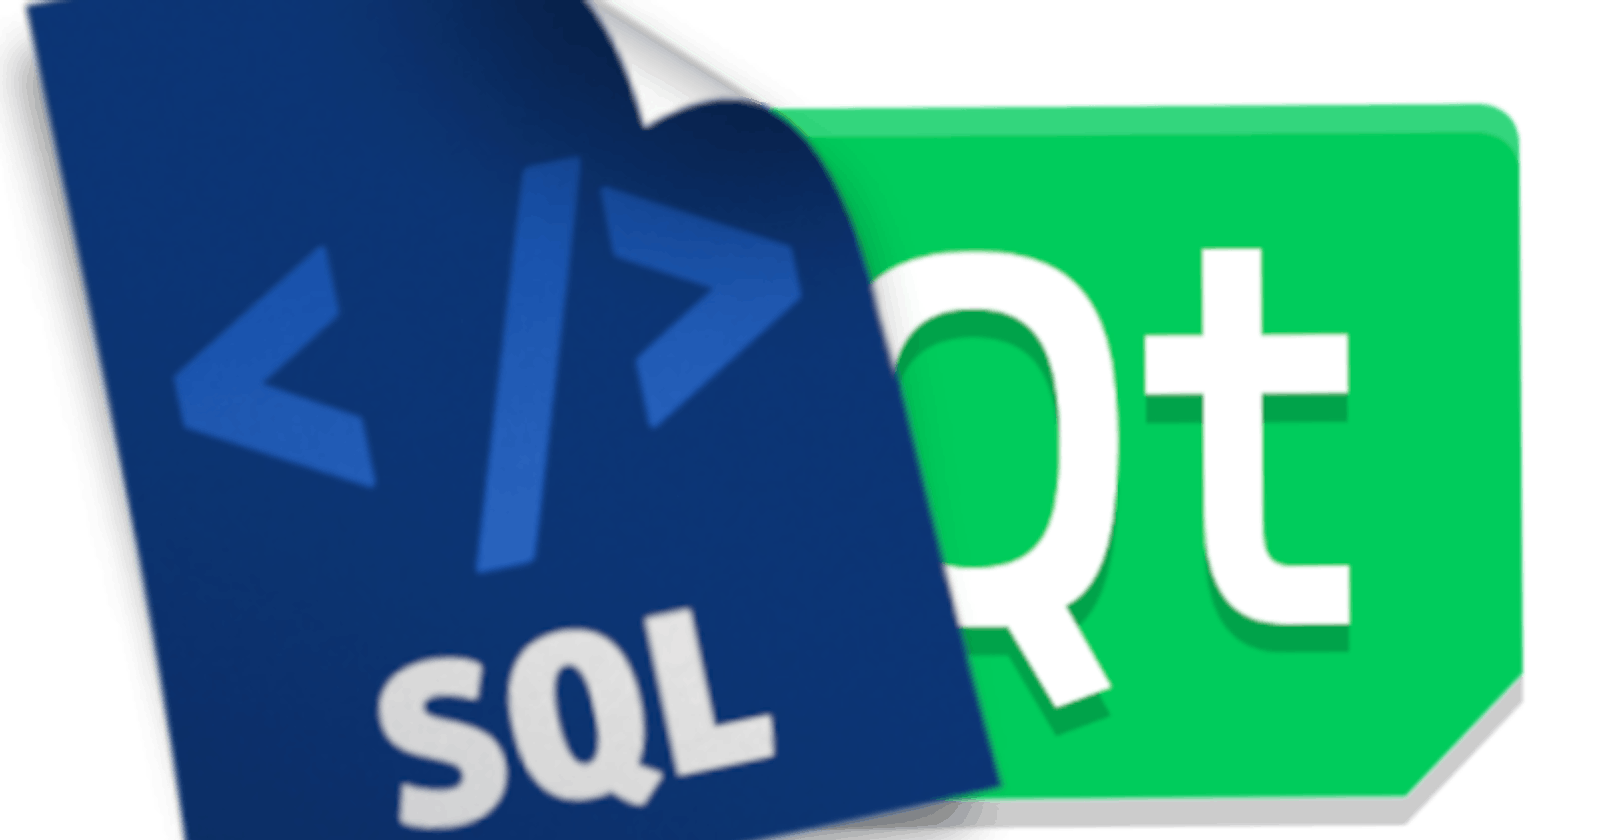 Here are the Necessary Binary files for working with SQL in Qt